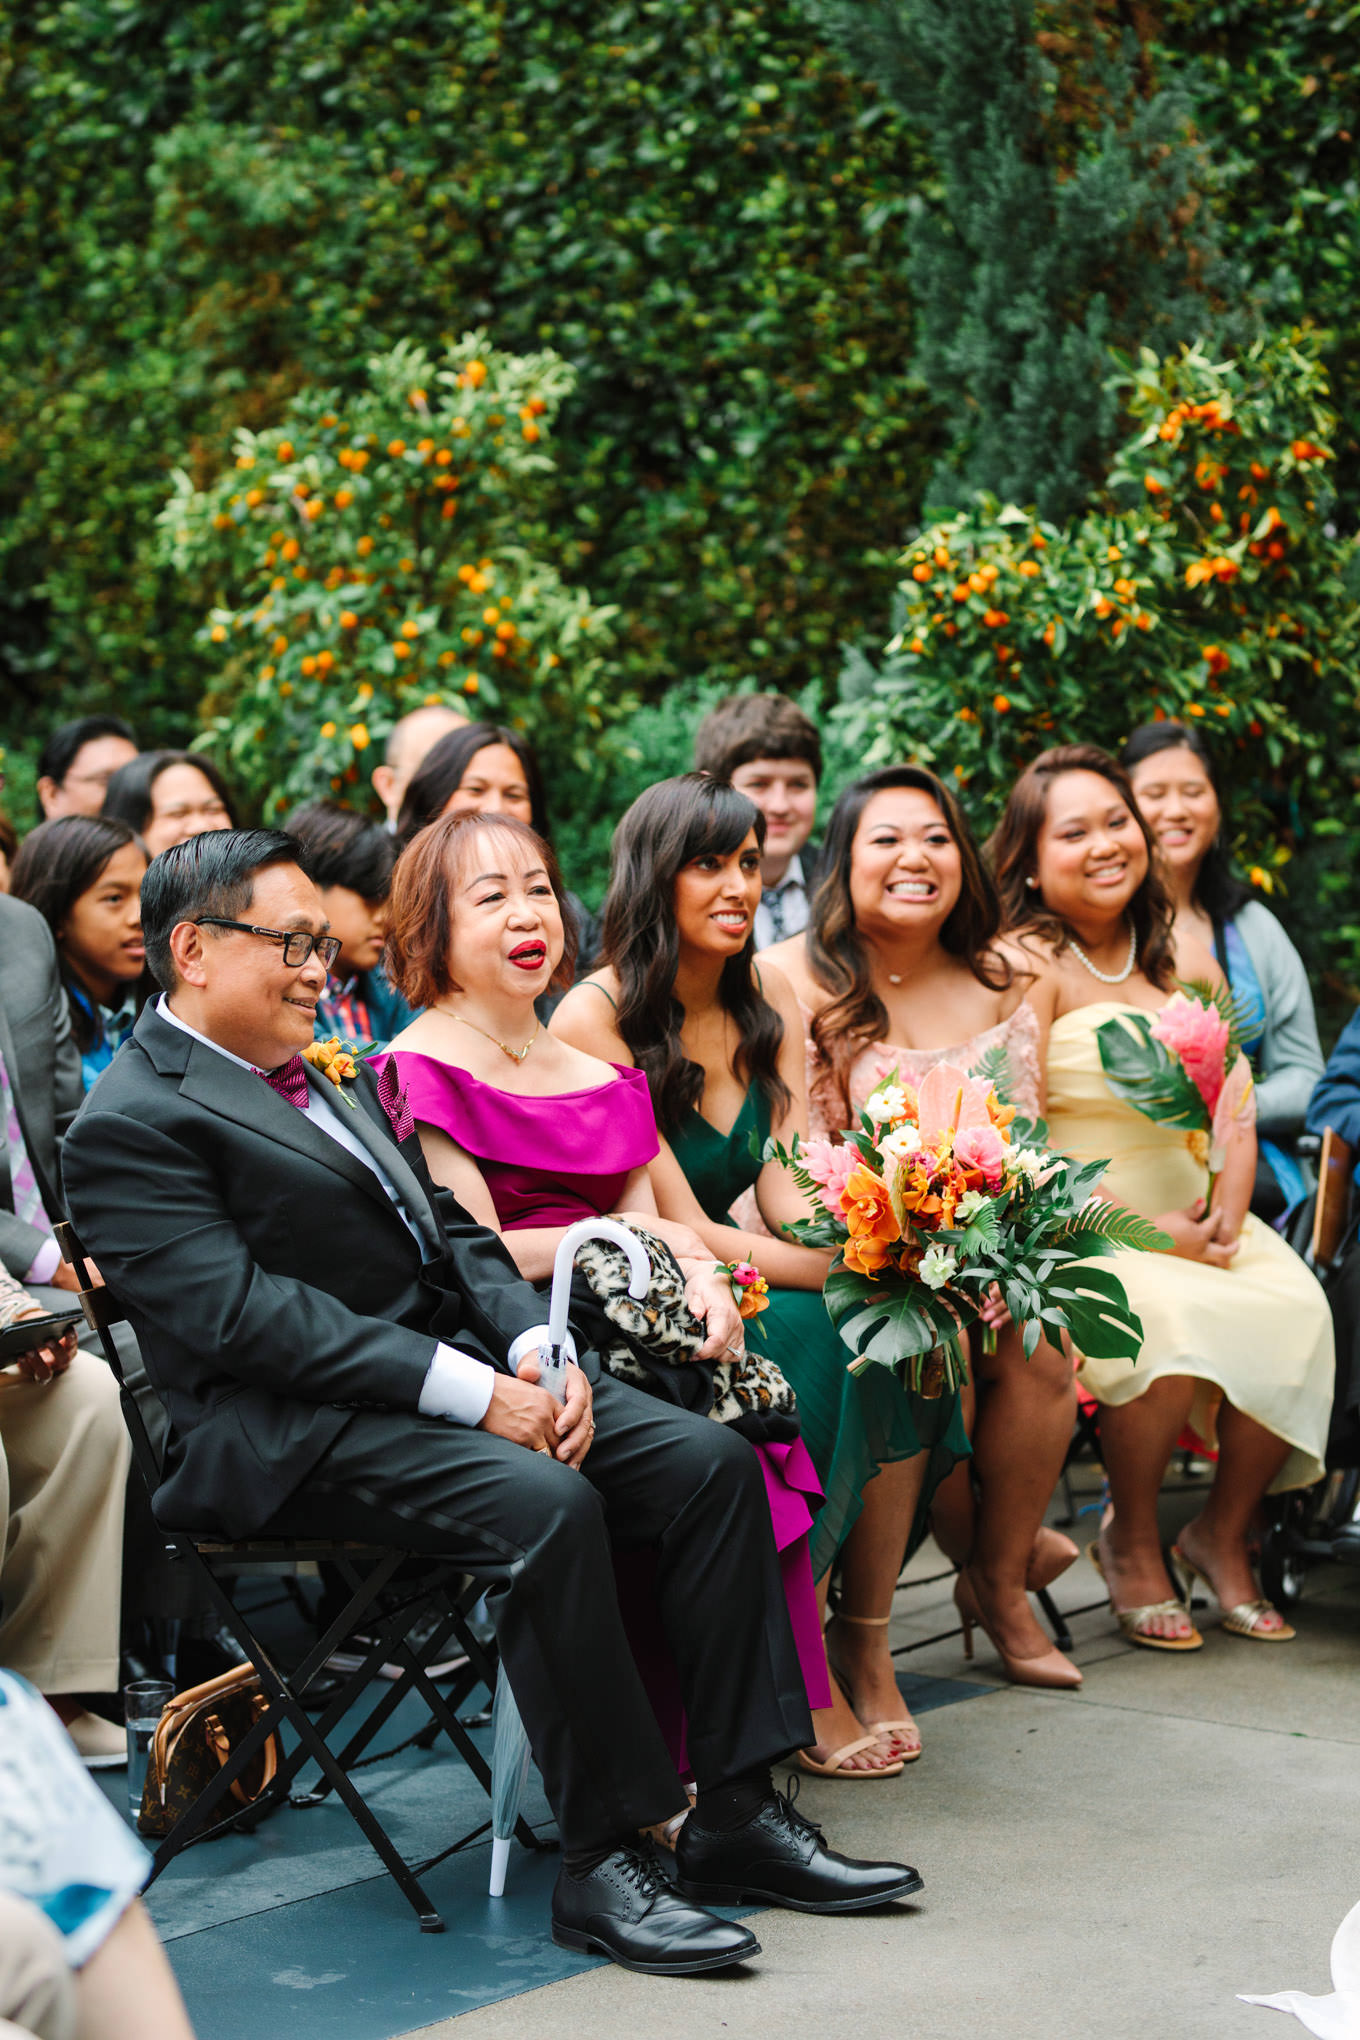 Wedding guests watching ceremony | TV inspired wedding at The Fig House Los Angeles | Published on The Knot | Fresh and colorful photography for fun-loving couples in Southern California | #losangeleswedding #TVwedding #colorfulwedding #theknot   Source: Mary Costa Photography | Los Angeles wedding photographer